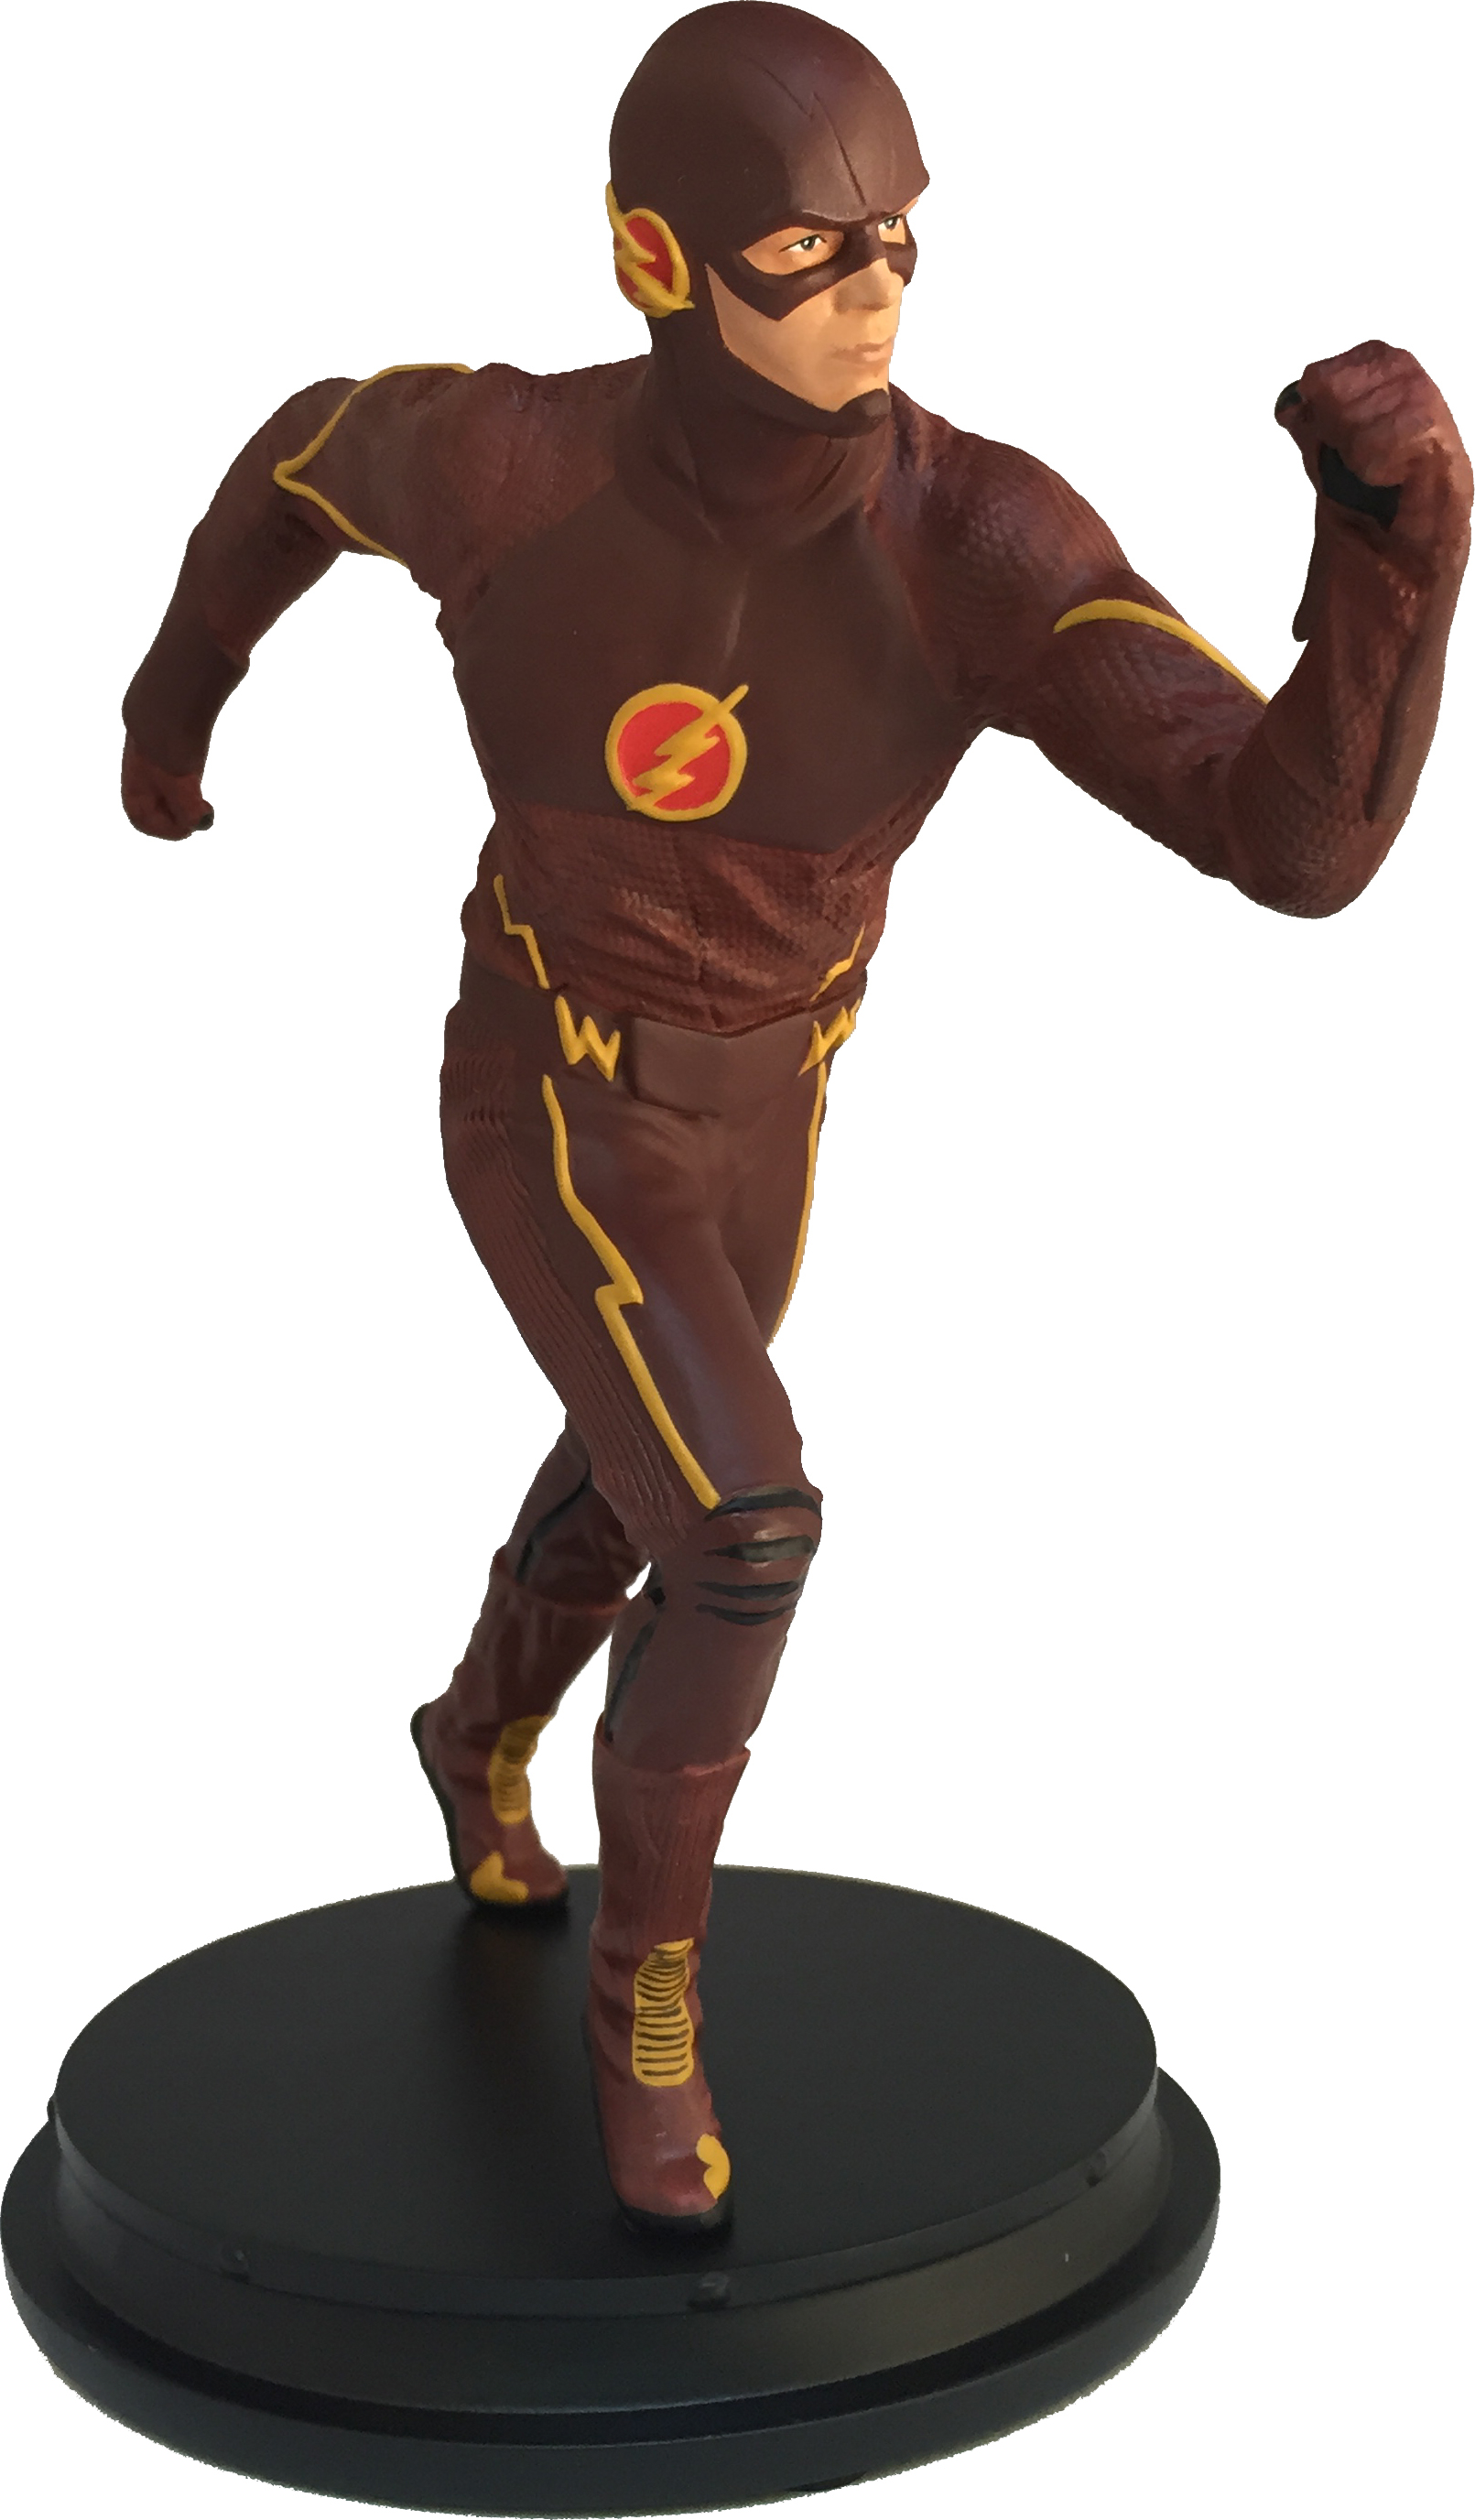 STK683409 Exclusive Stephen Amell Arrow and Grant Gustin Flash Statues Revealed